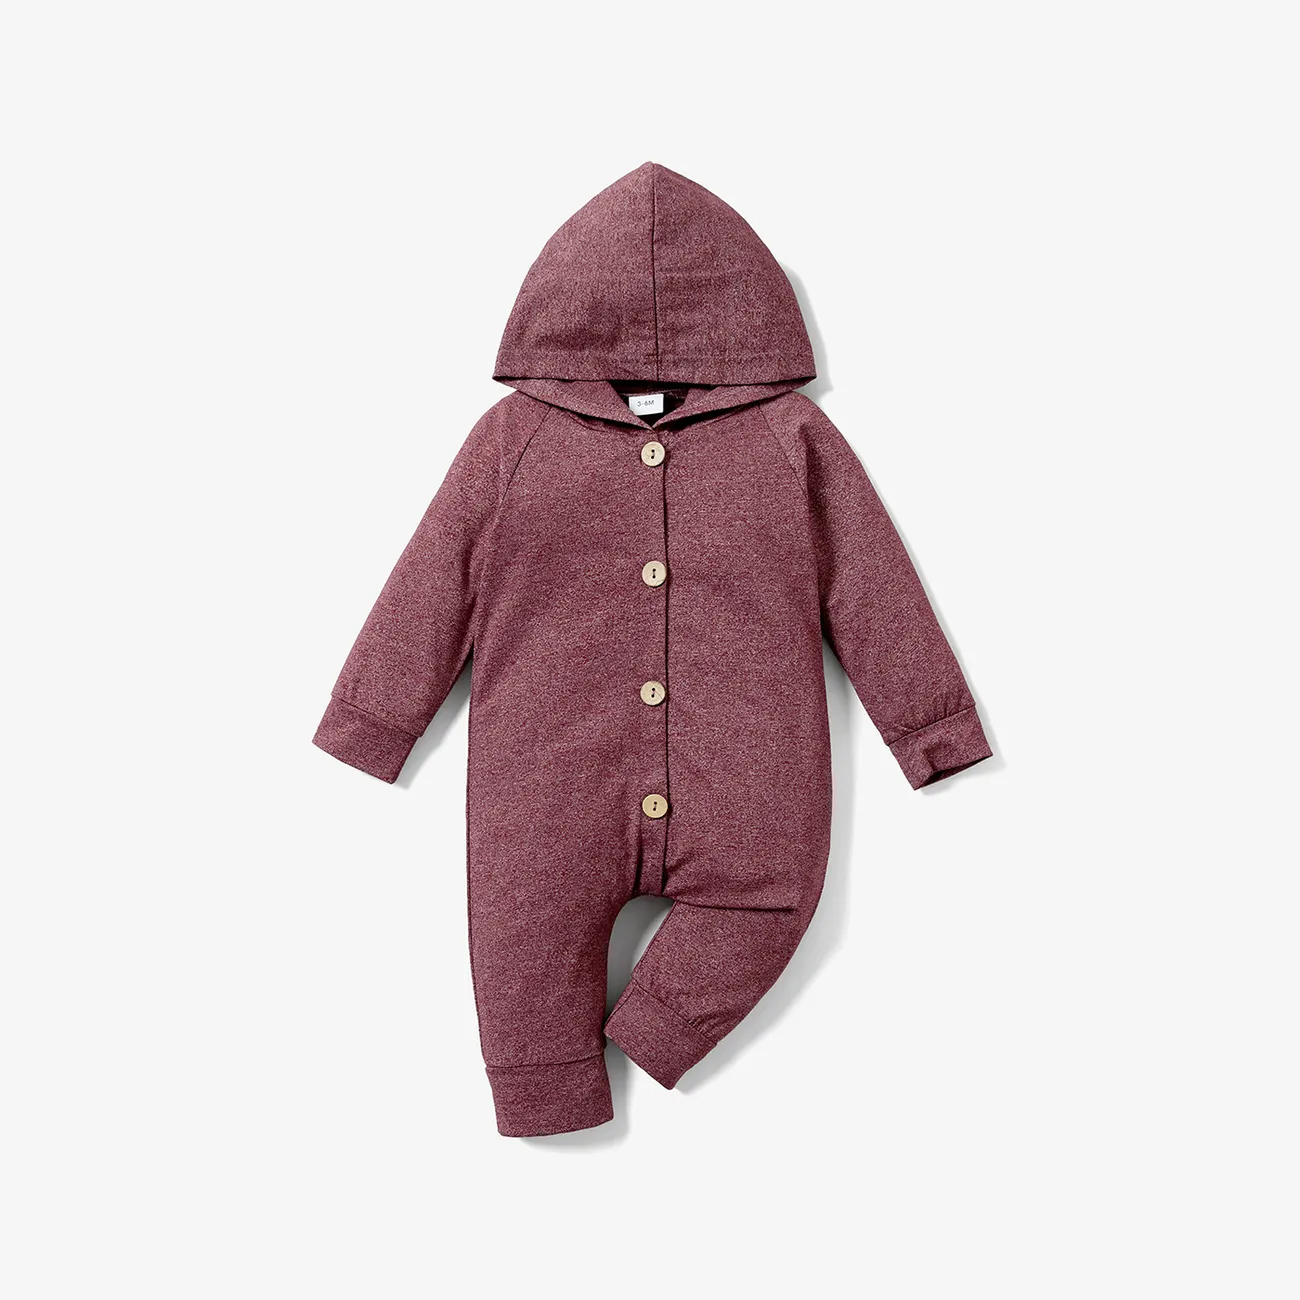 Solid Hooded Long-sleeve Baby Jumpsuit Red big image 1